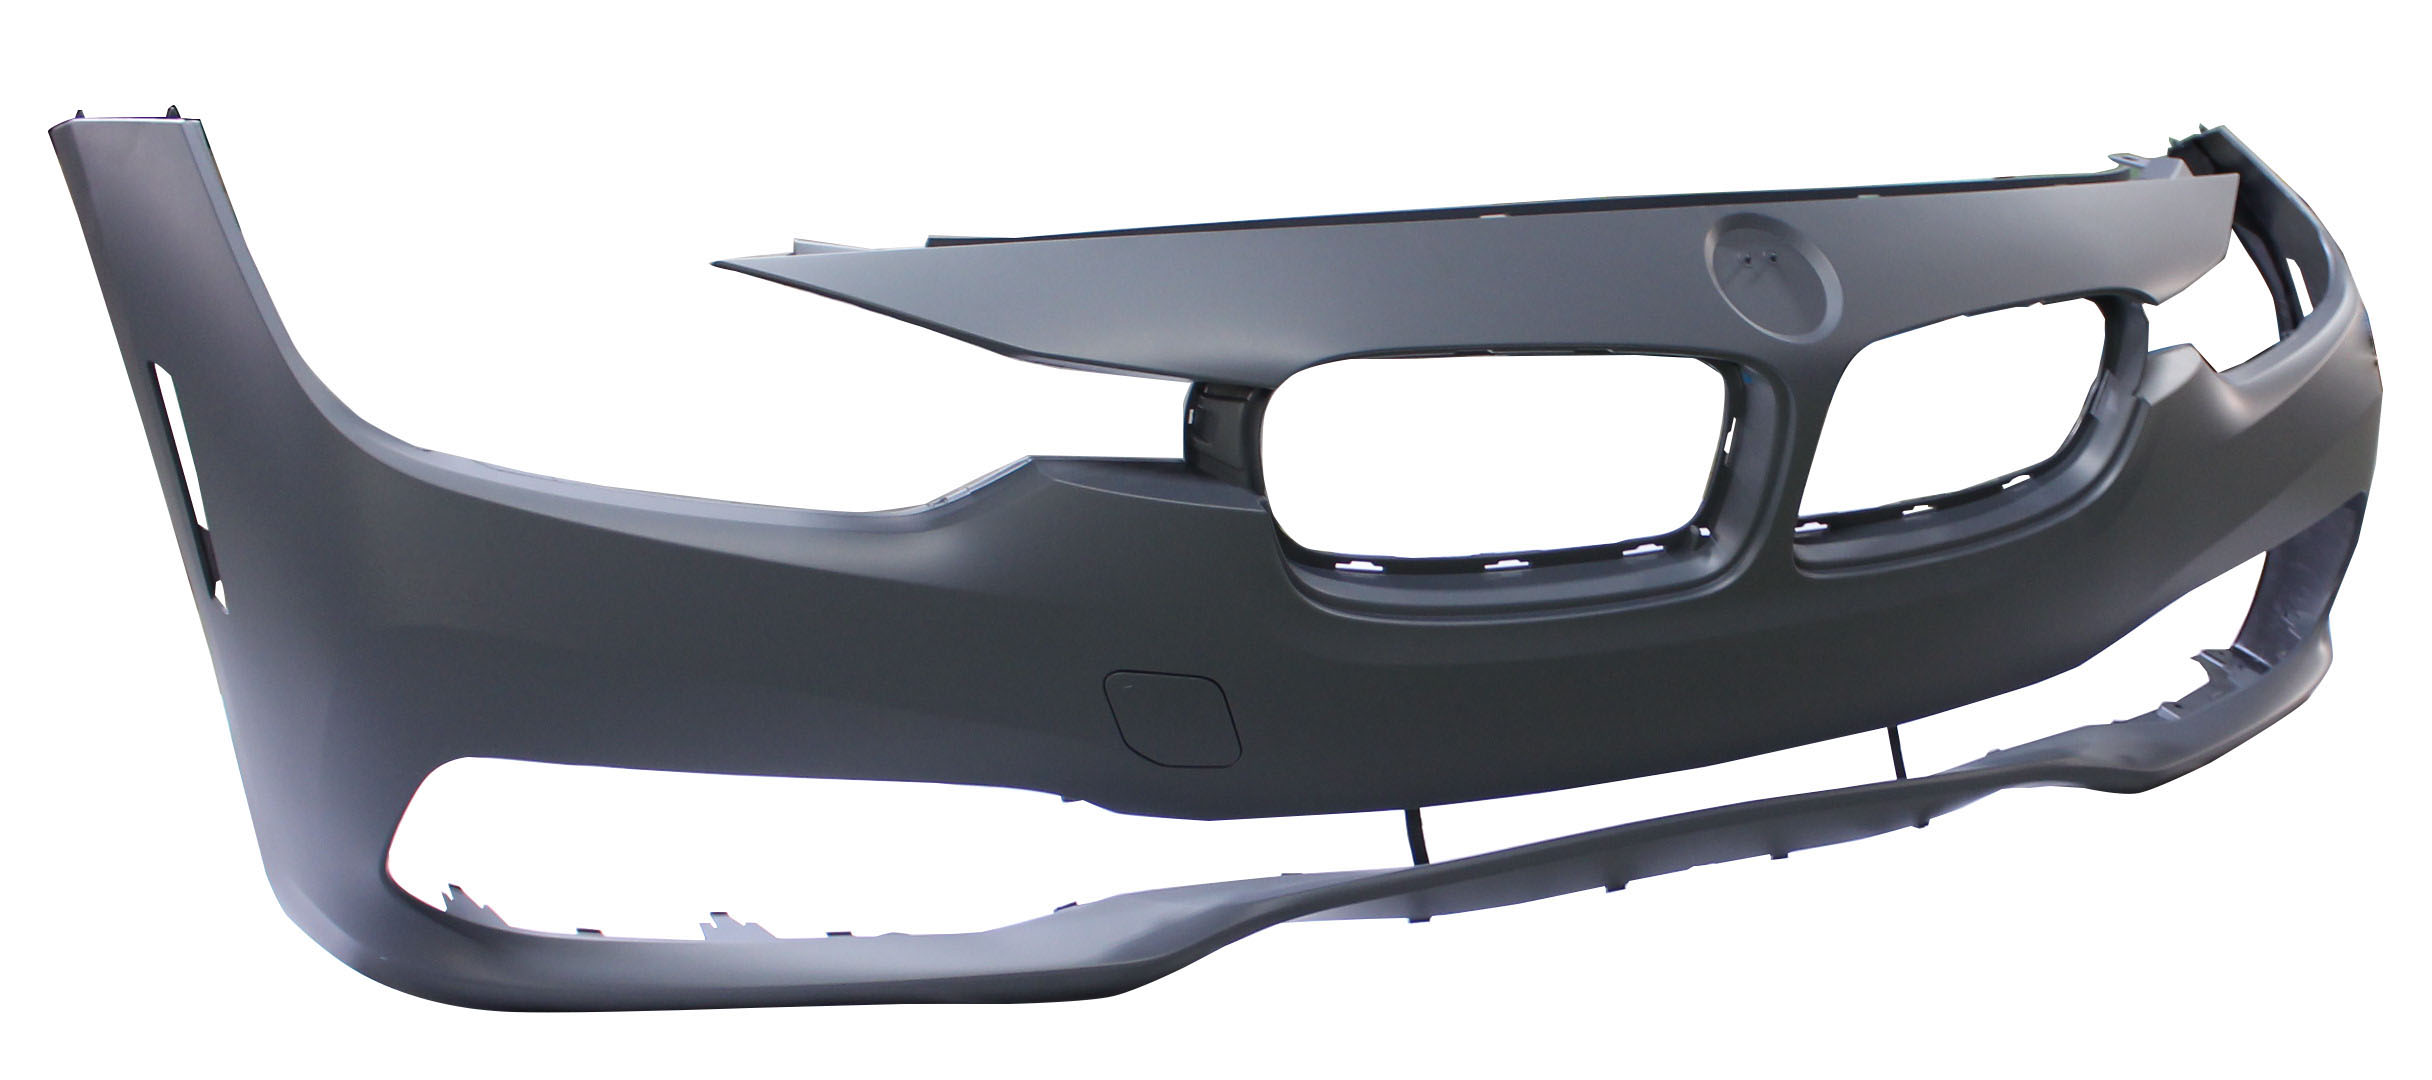 Aftermarket BUMPER COVERS for BMW - 340I, 340i,16-18,Front bumper cover